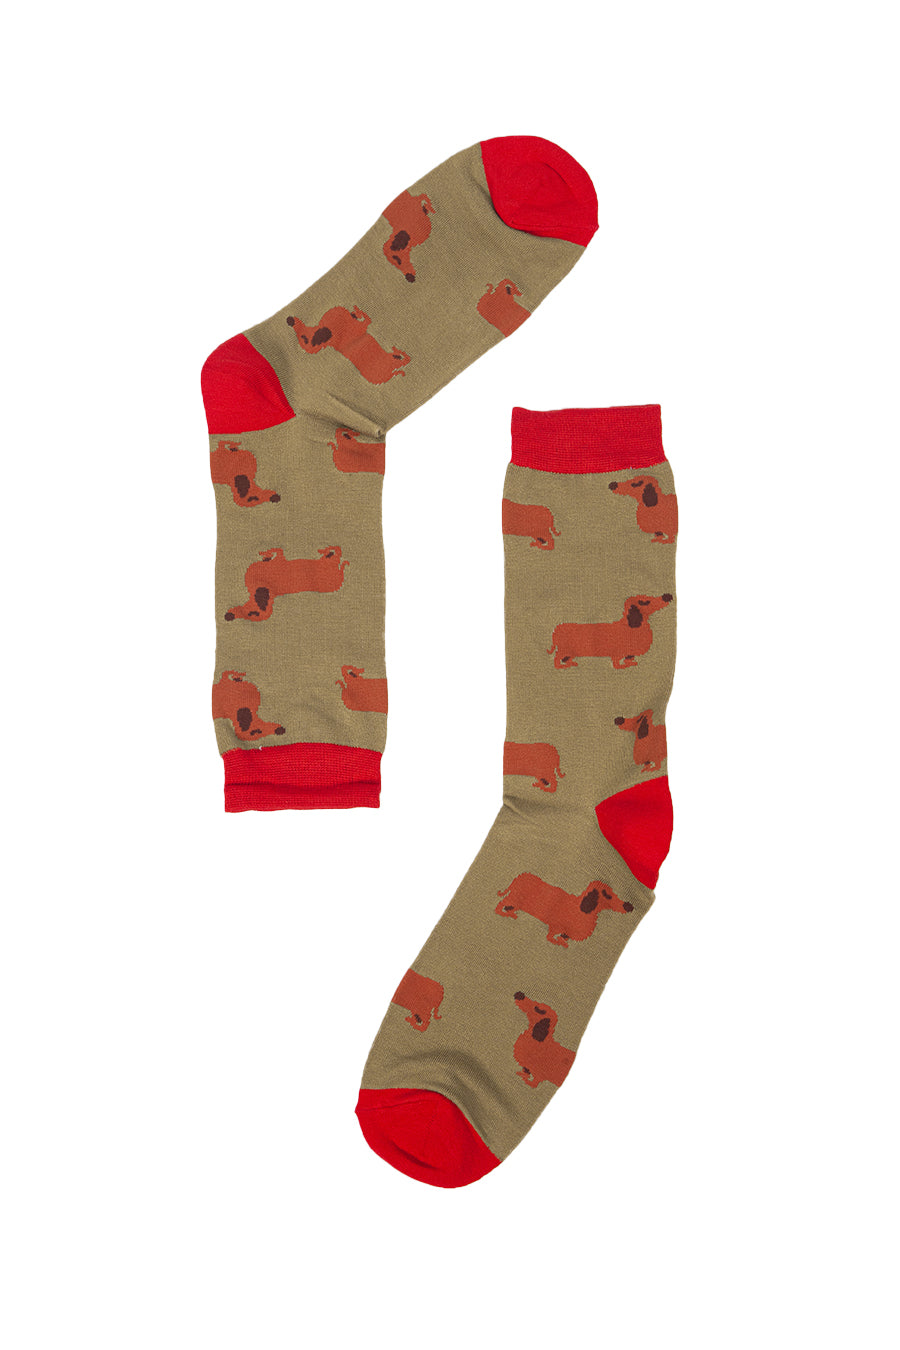 mustard red socks with miniature dachshunds on them